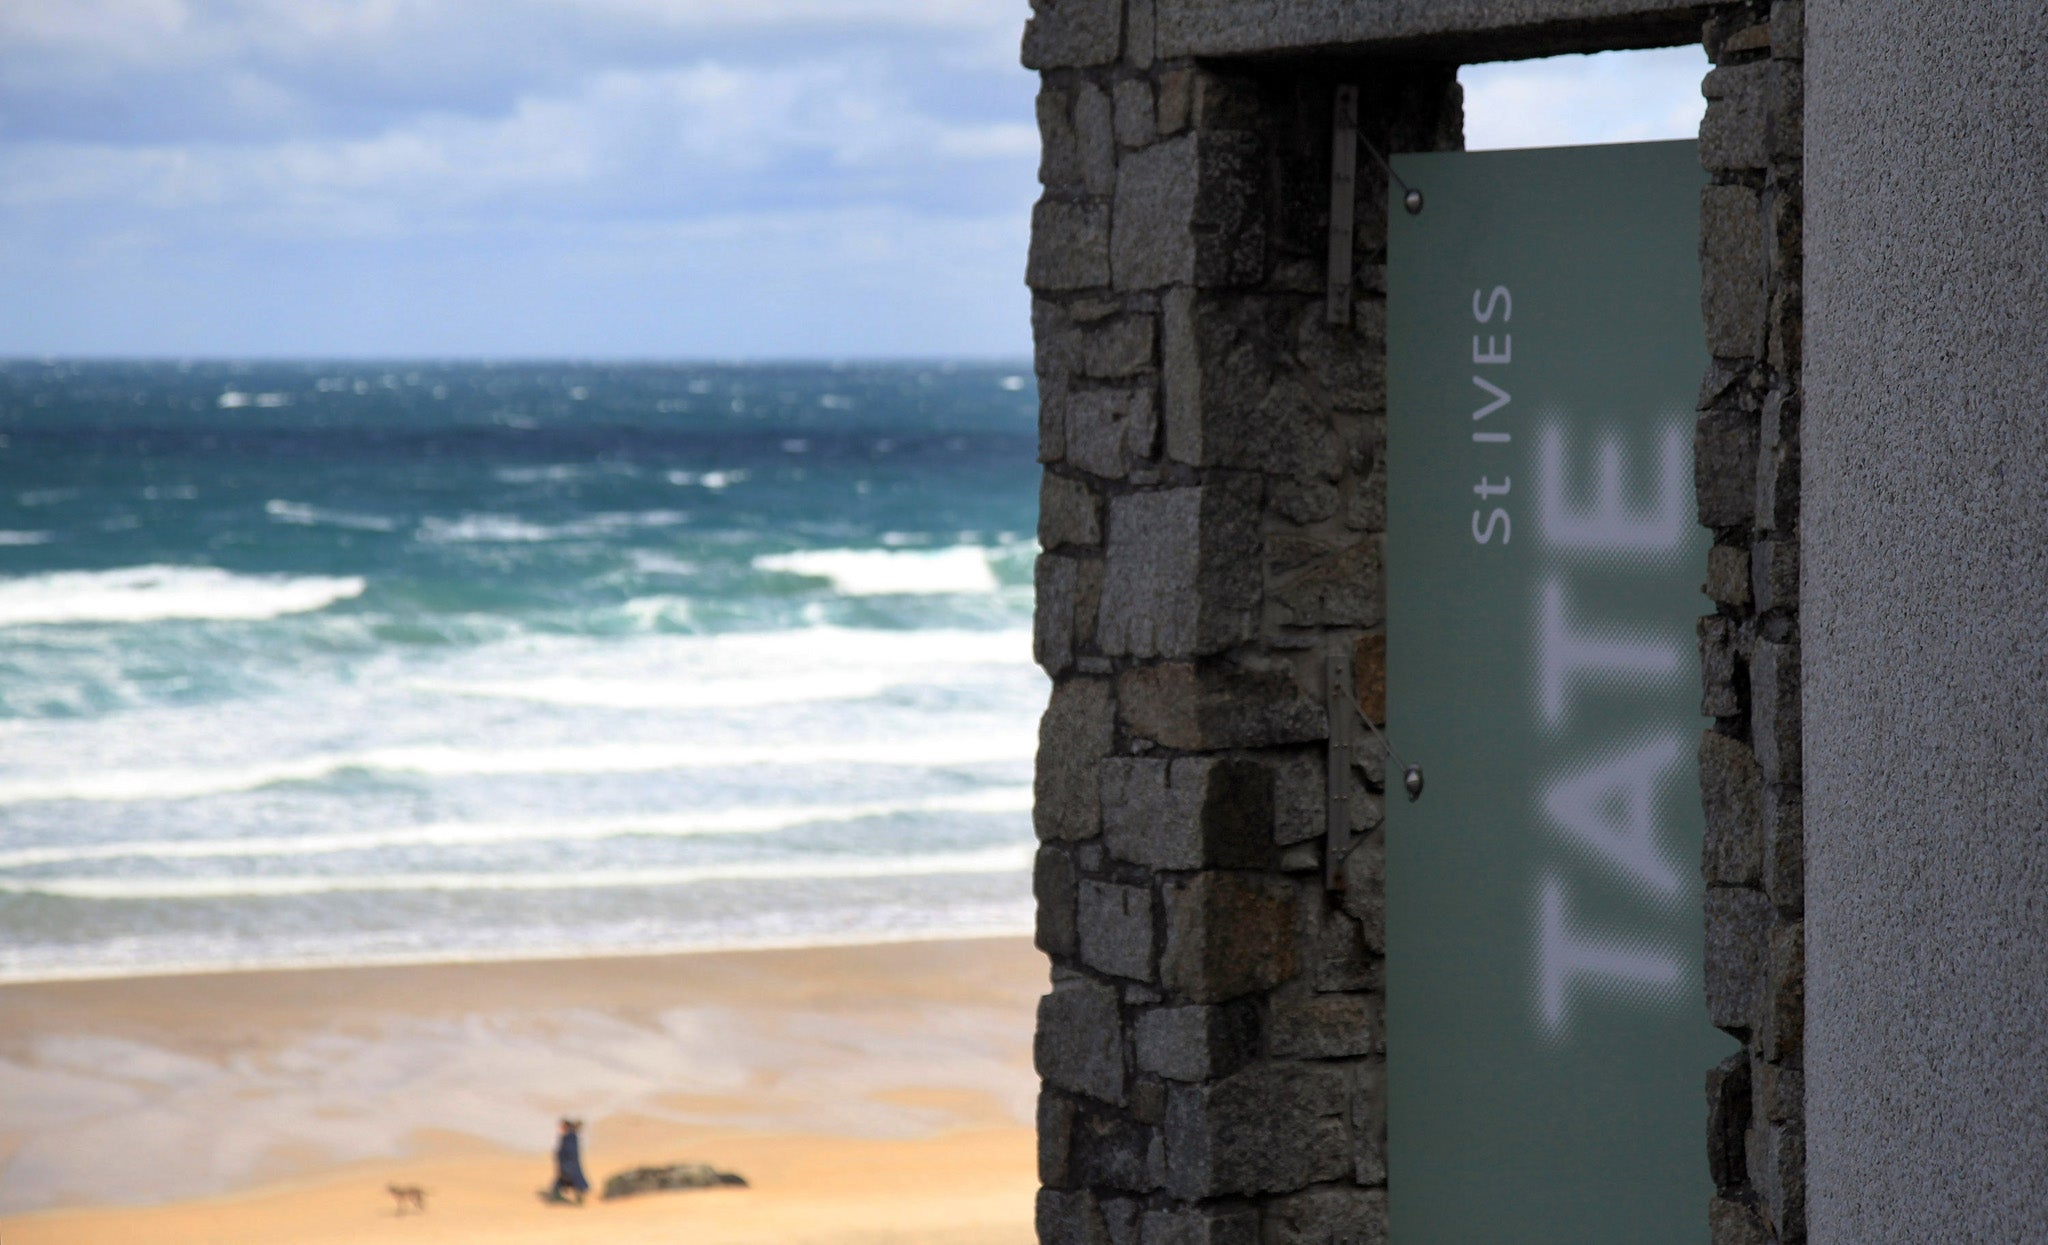 Tate St Ives caught fire yesterday but none of the artworks are thought to have been damaged.